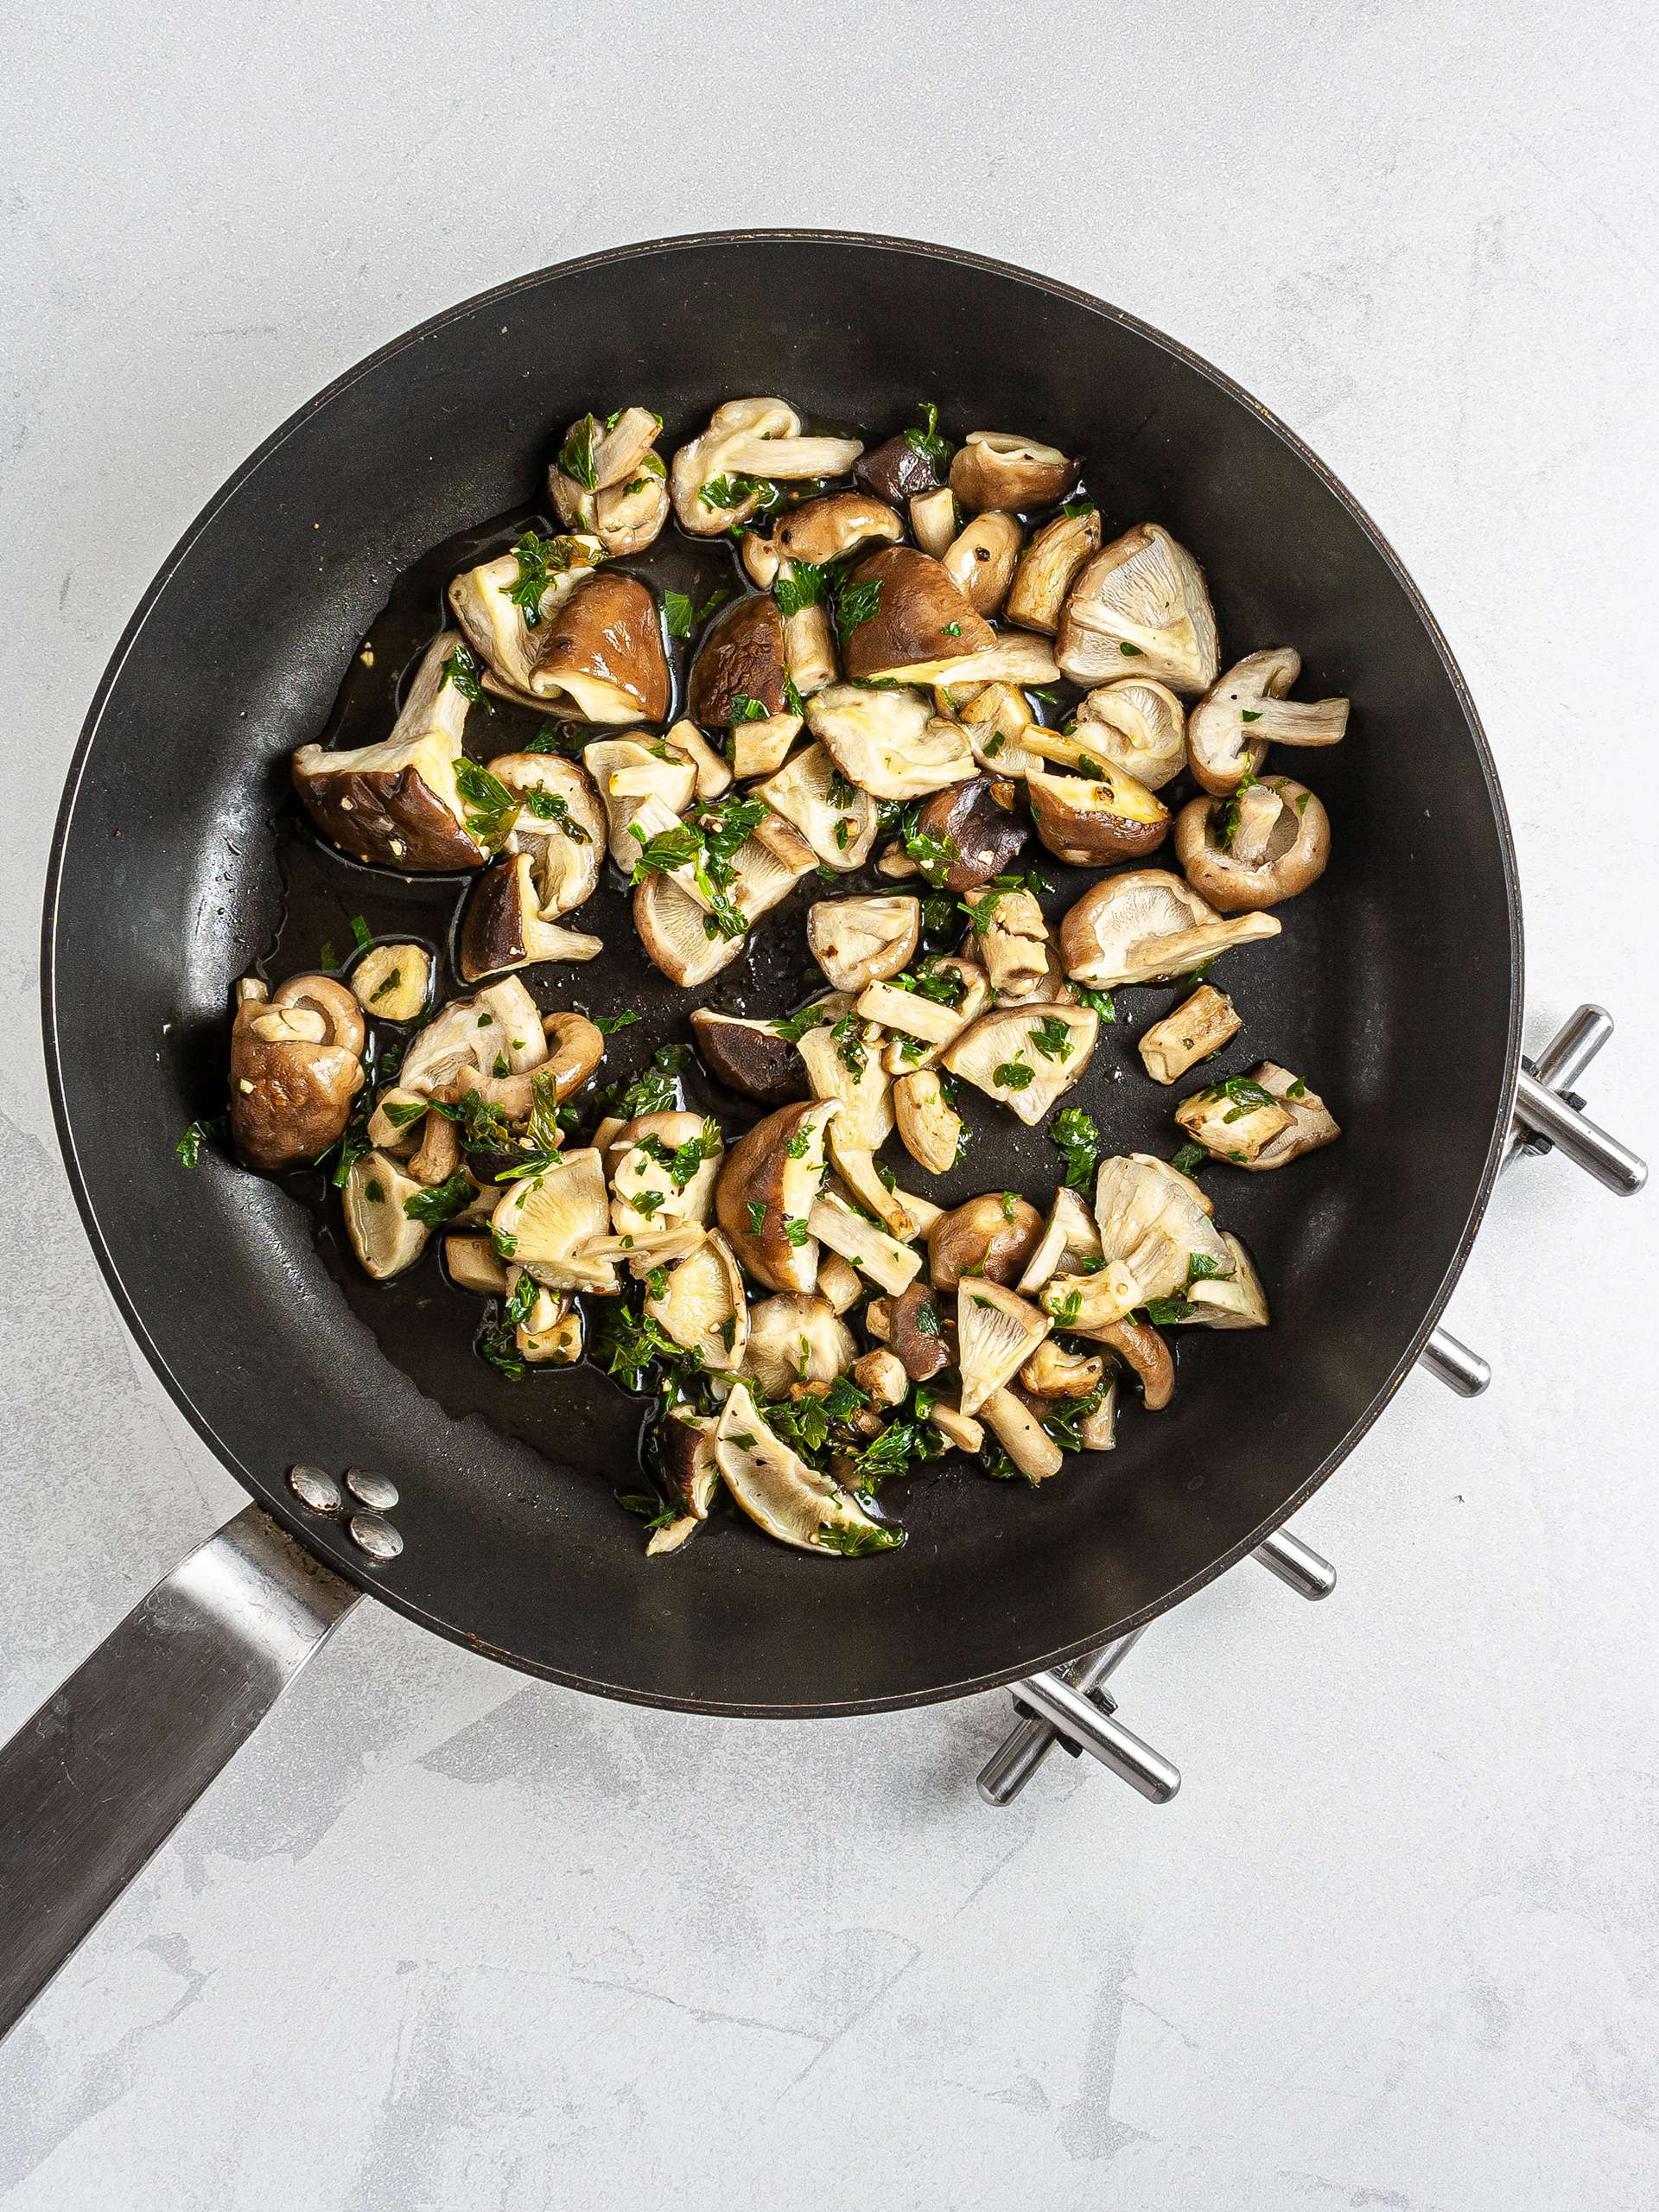 Mushrooms cooked with parsley and pepper in a skillet